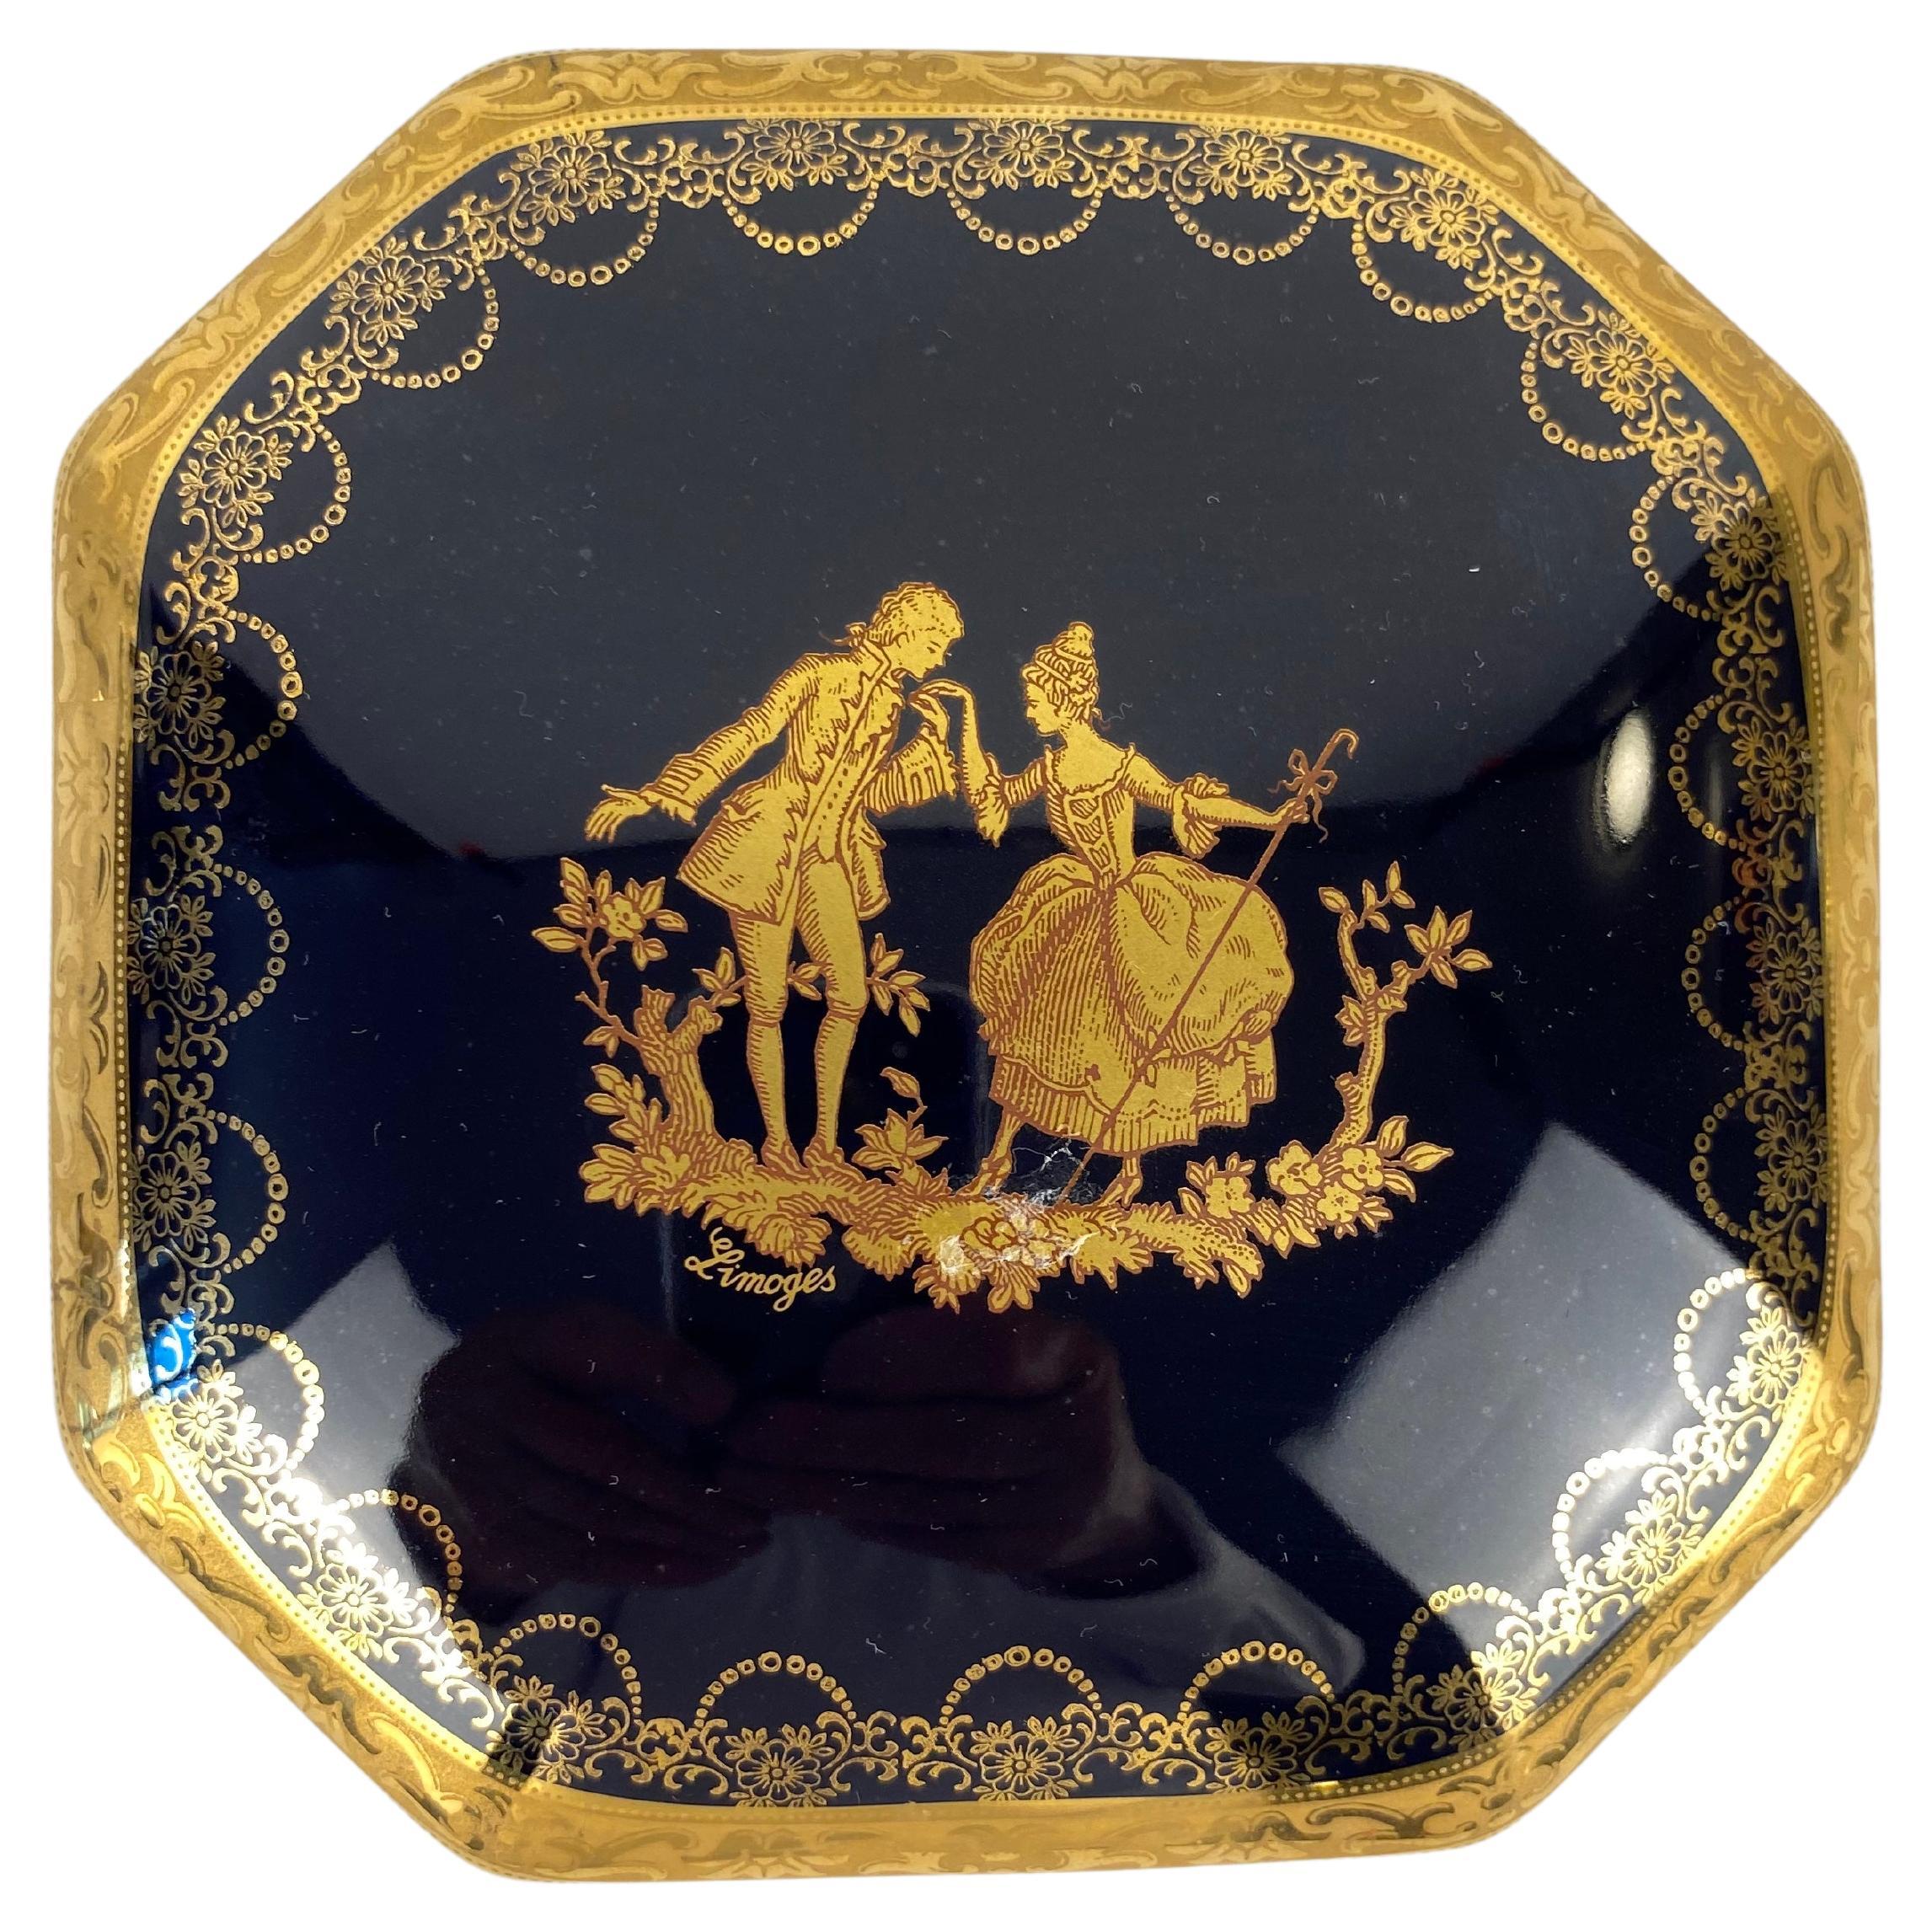 A fine cobalt blue and gold Limoges porcelain hand crafted and hand painted gold trimmed trinket, jewelry box or candy dish. 

Bears the well-known Limoges mark.

Measures: 4 7/8